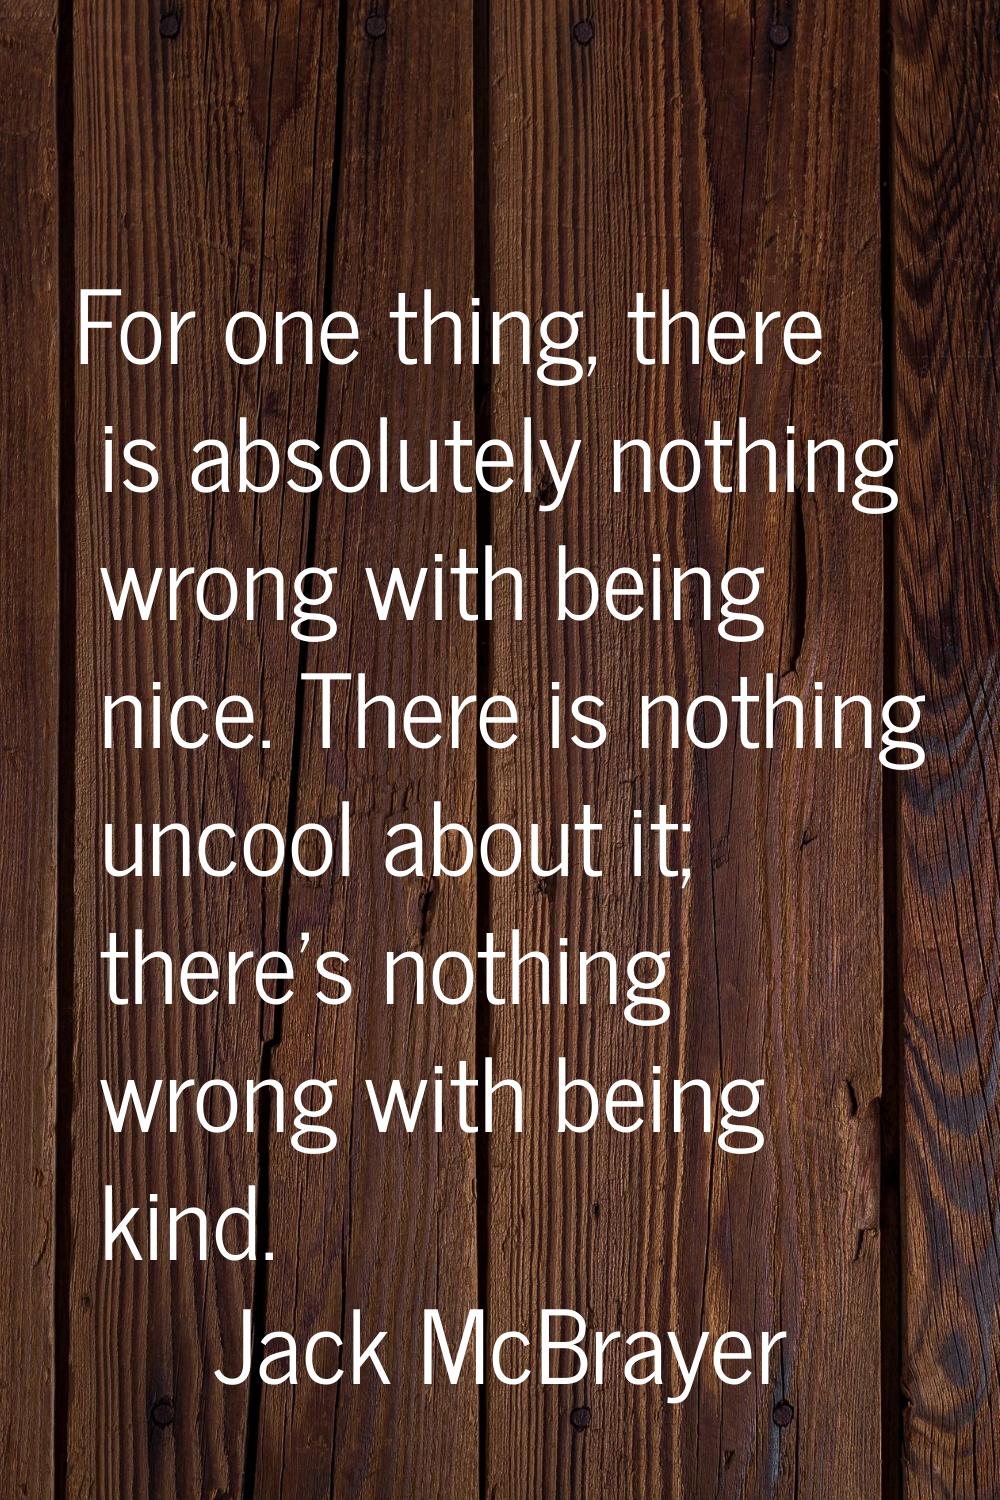 For one thing, there is absolutely nothing wrong with being nice. There is nothing uncool about it;